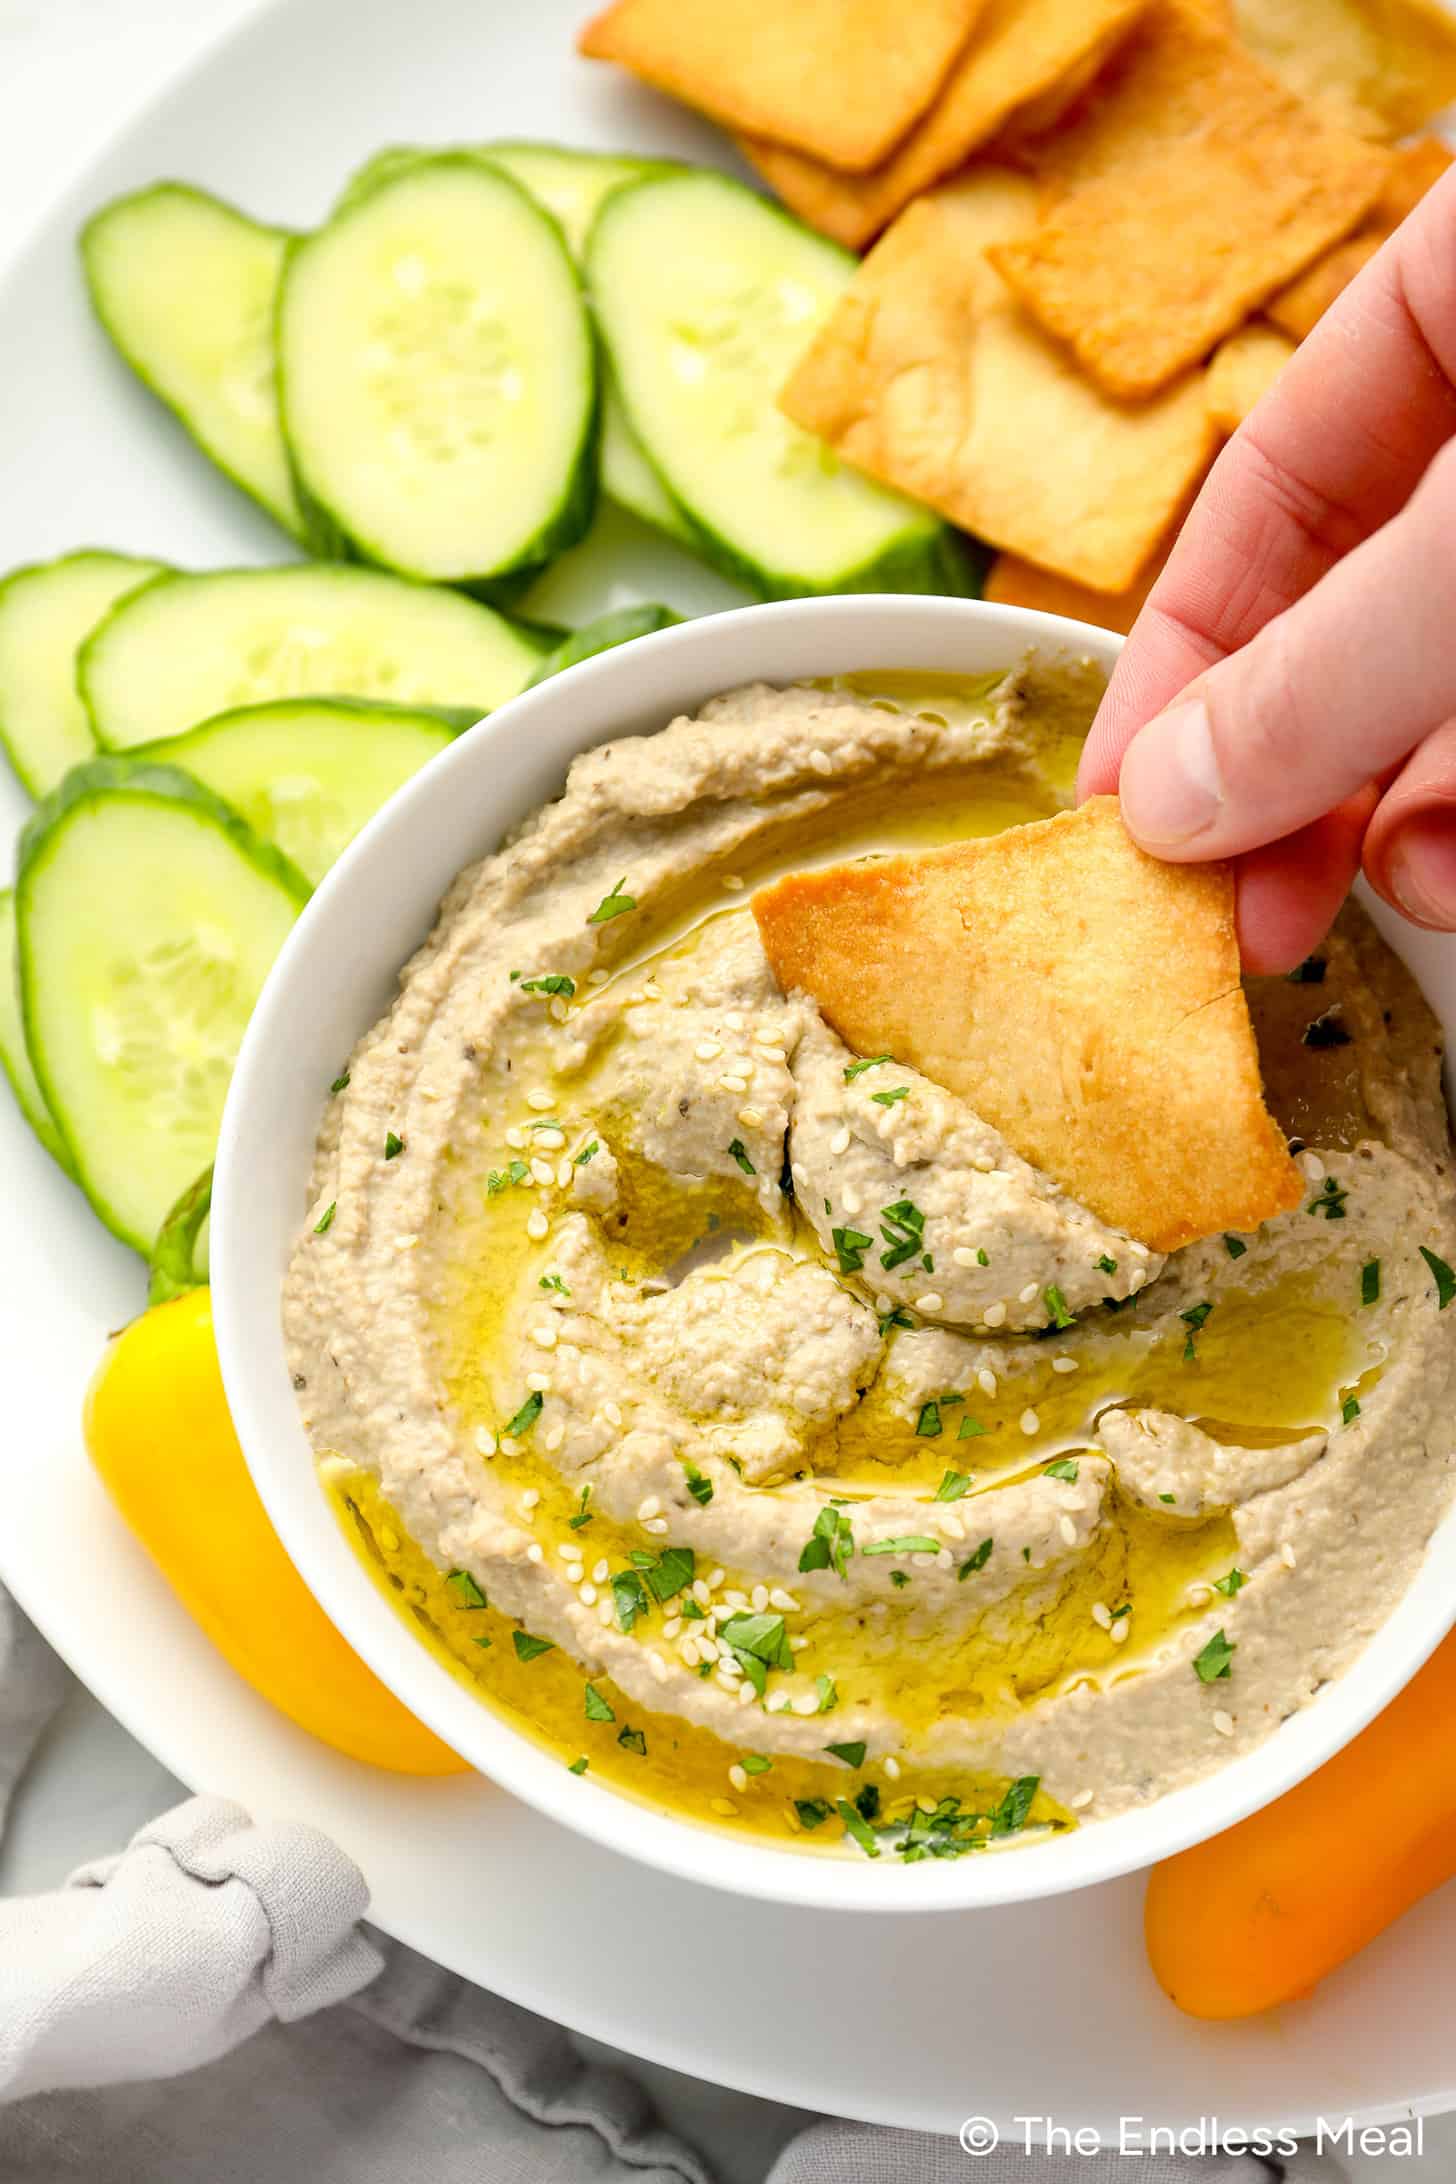 Scooping some Baba Ganoush out of an appetizer bowl with a pita chip